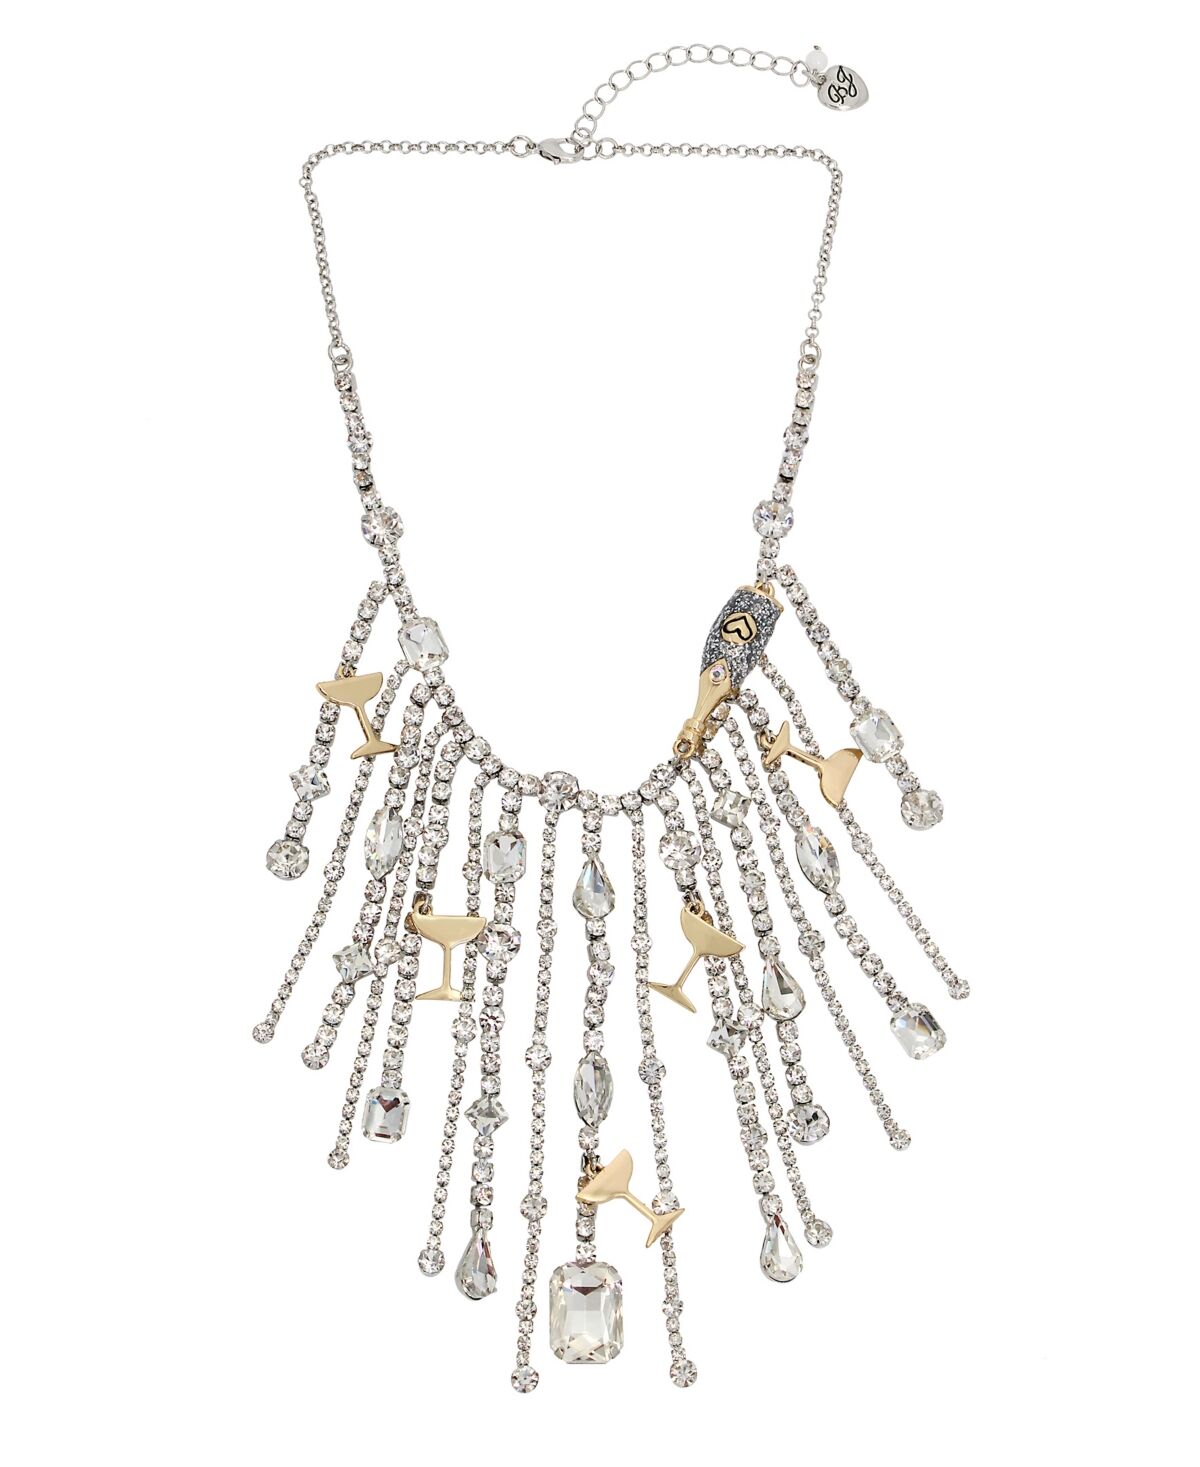 Betsey Johnson Faux Stone Going All Out Fringe Bib Necklace - Crystal, Rhodium